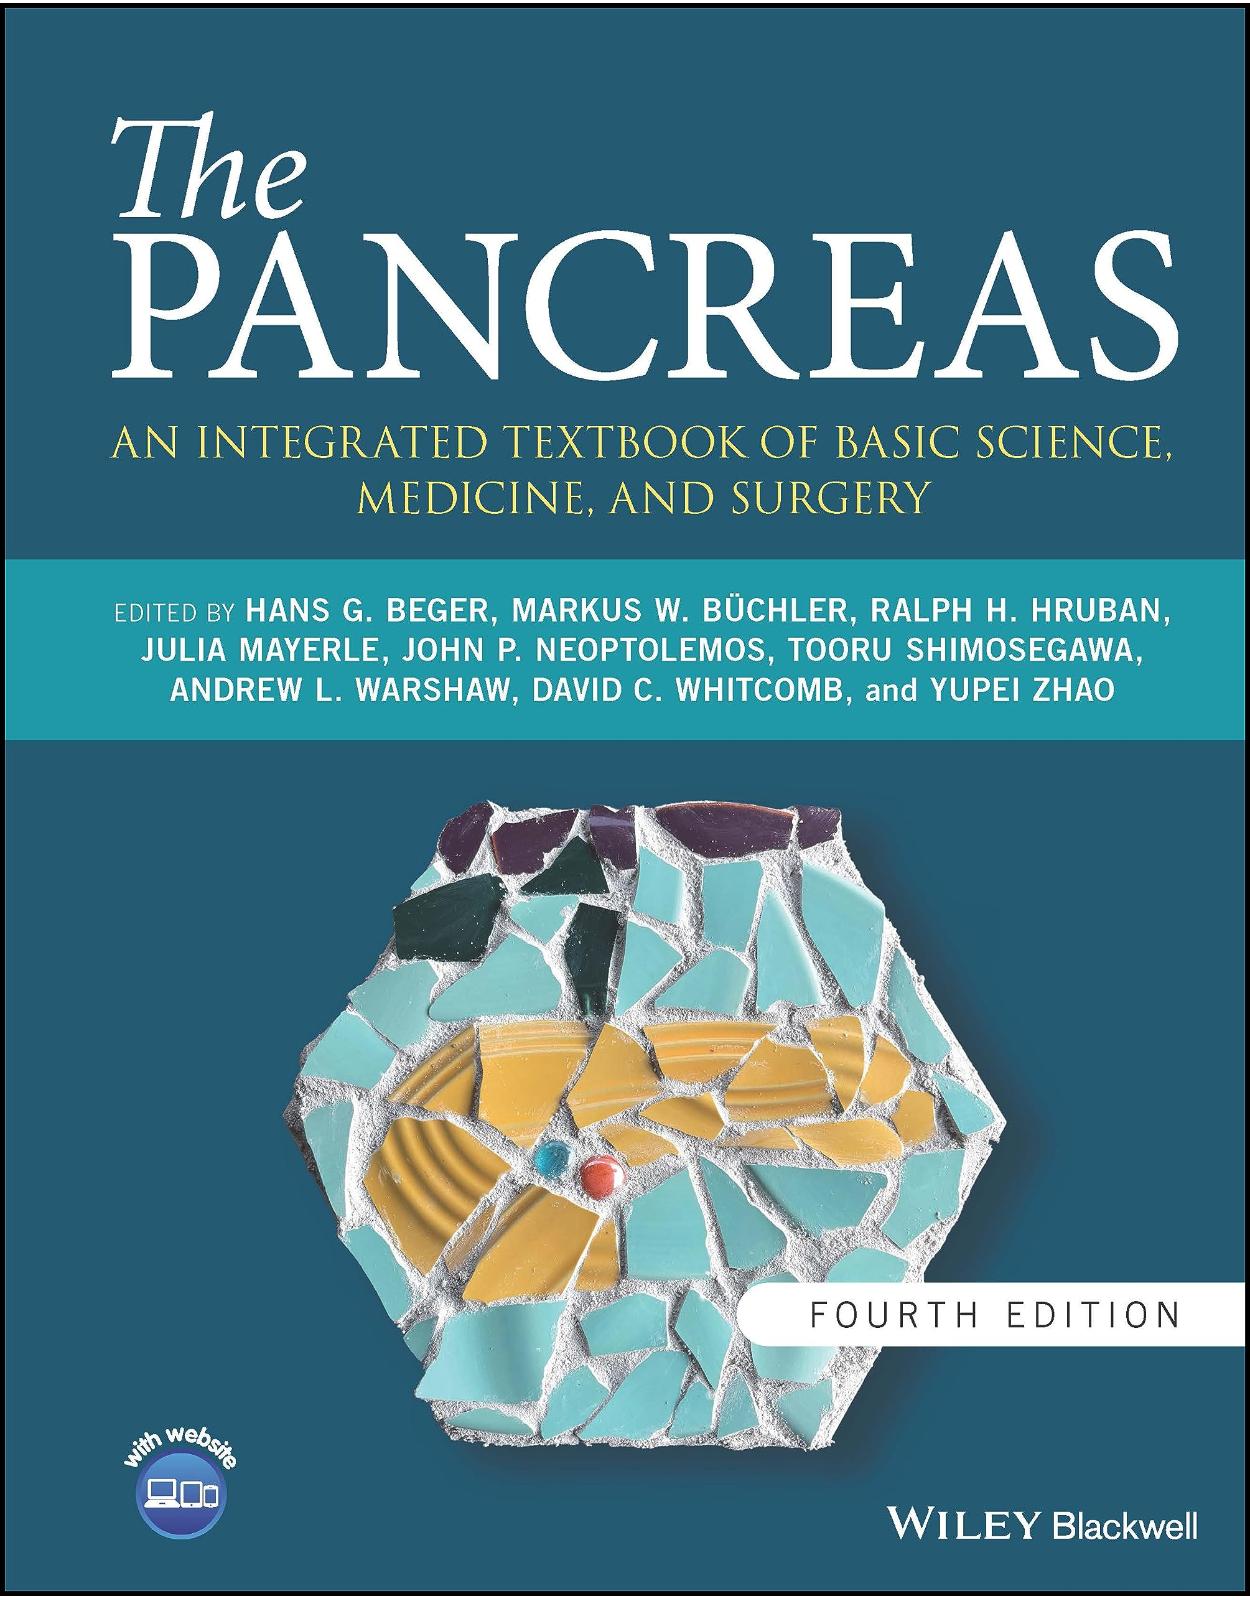 The Pancreas – An Integrated Textbook of Basic Science, Medicine, and Surgery